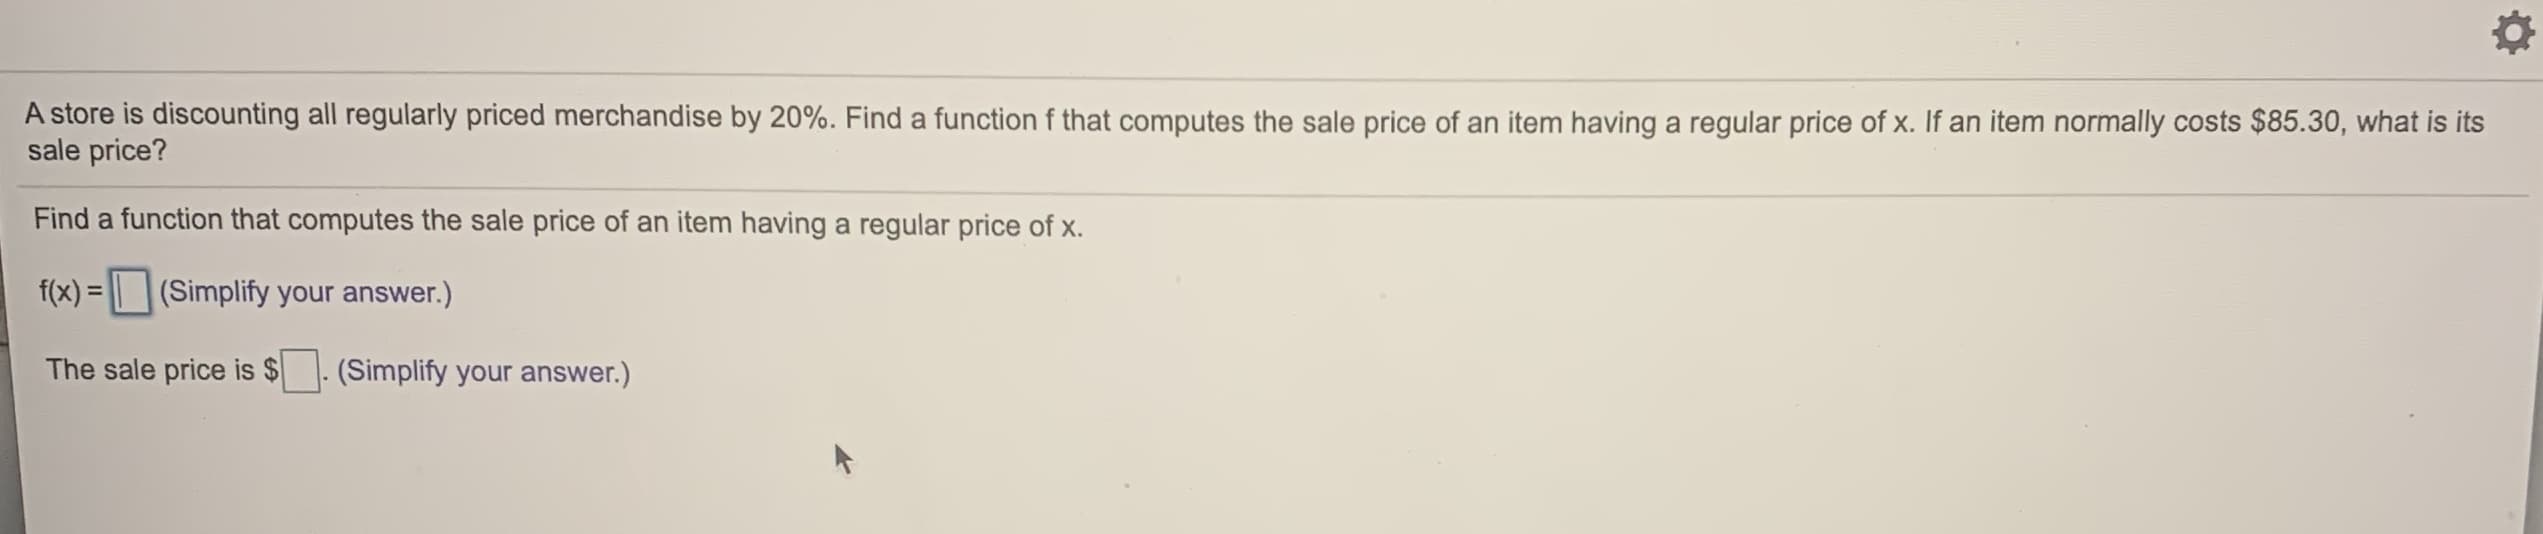 A store is discounting all regularly priced merchandise by 20%. Find a function f that computes the sale price of an item having a regular price of x. If an item normally costs $85.30, what is its
sale price?
